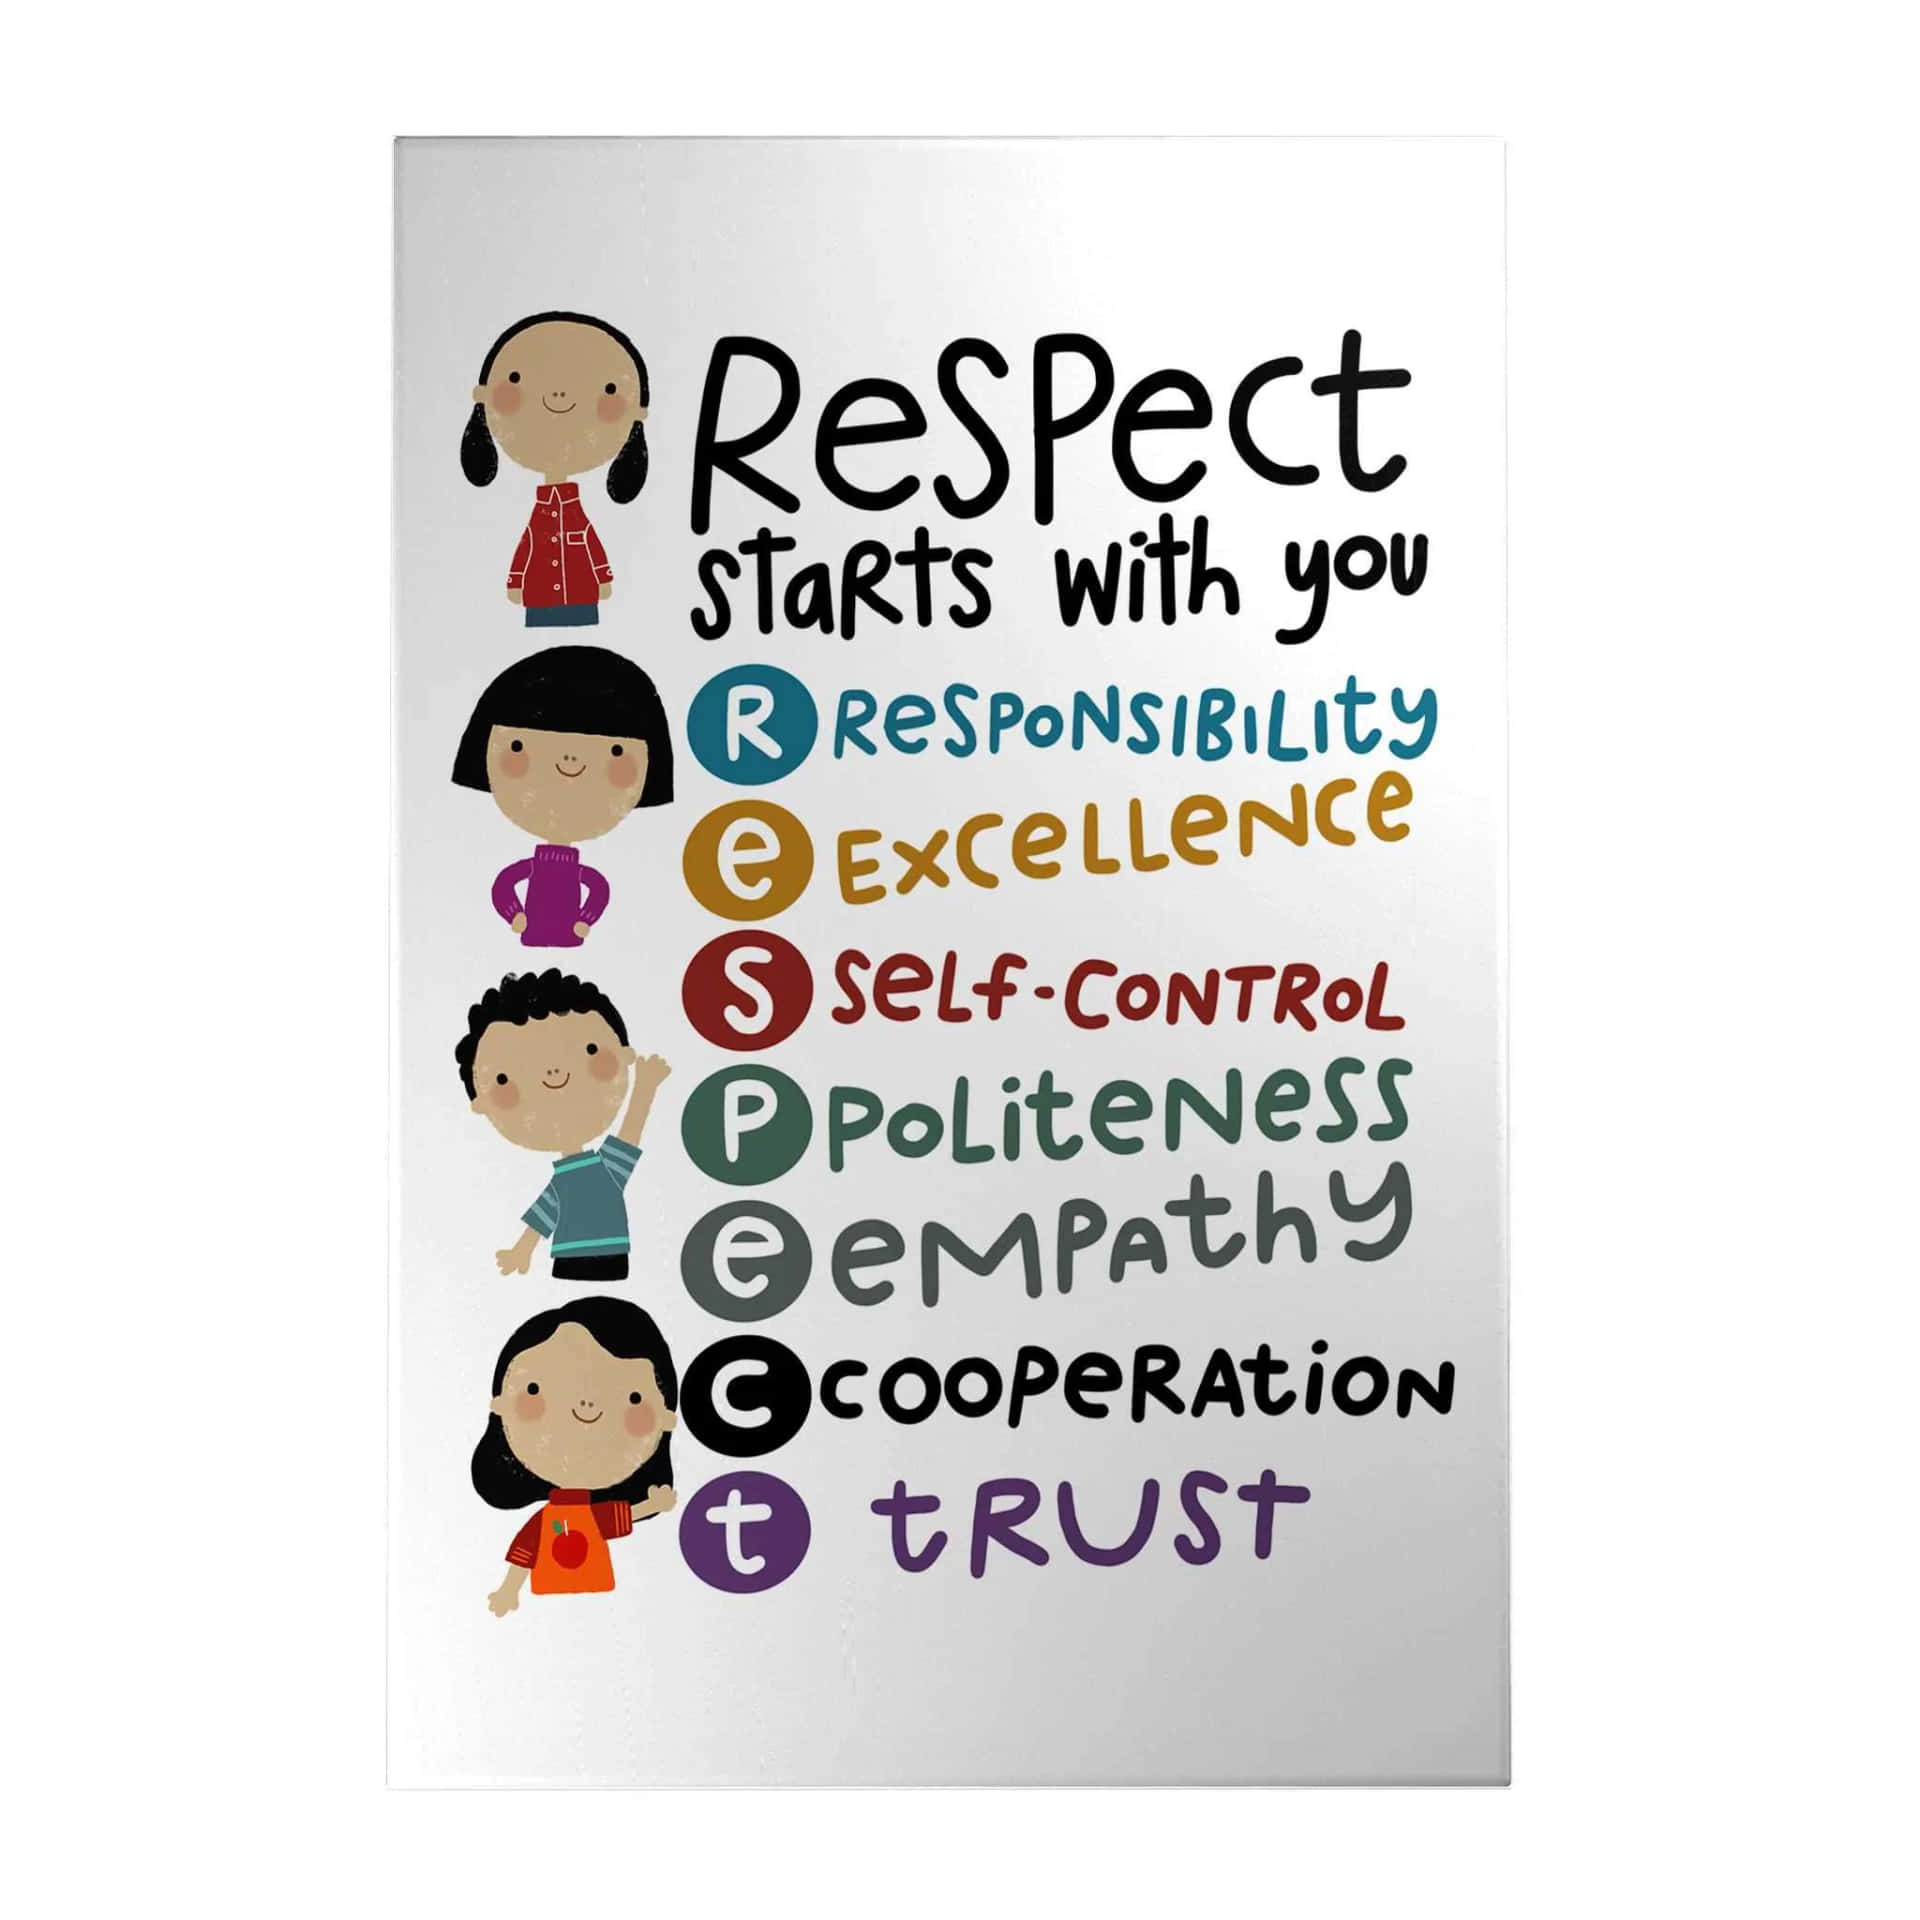 respect starts with you - mirror print